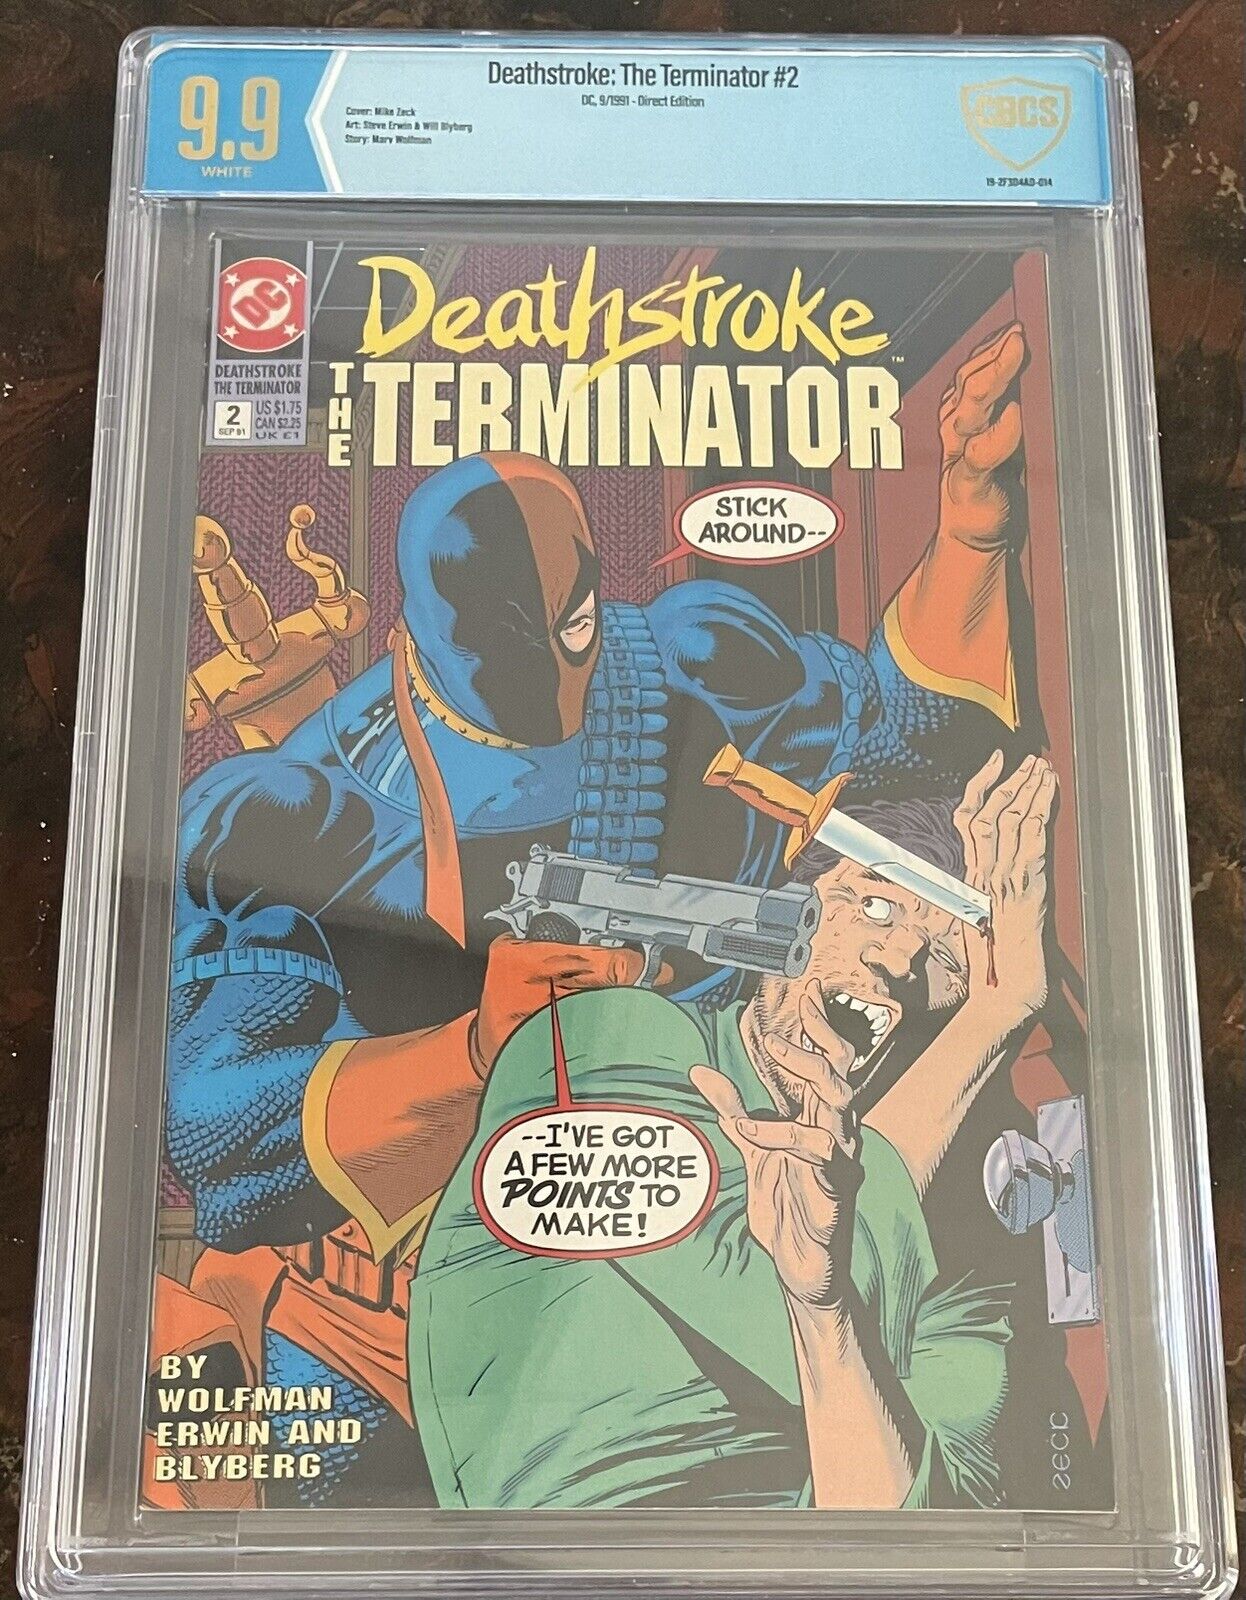 Deathstroke: The Terminator #2 1991 DC  Mike Zeck Cover 9.9 CBCS Like CGC